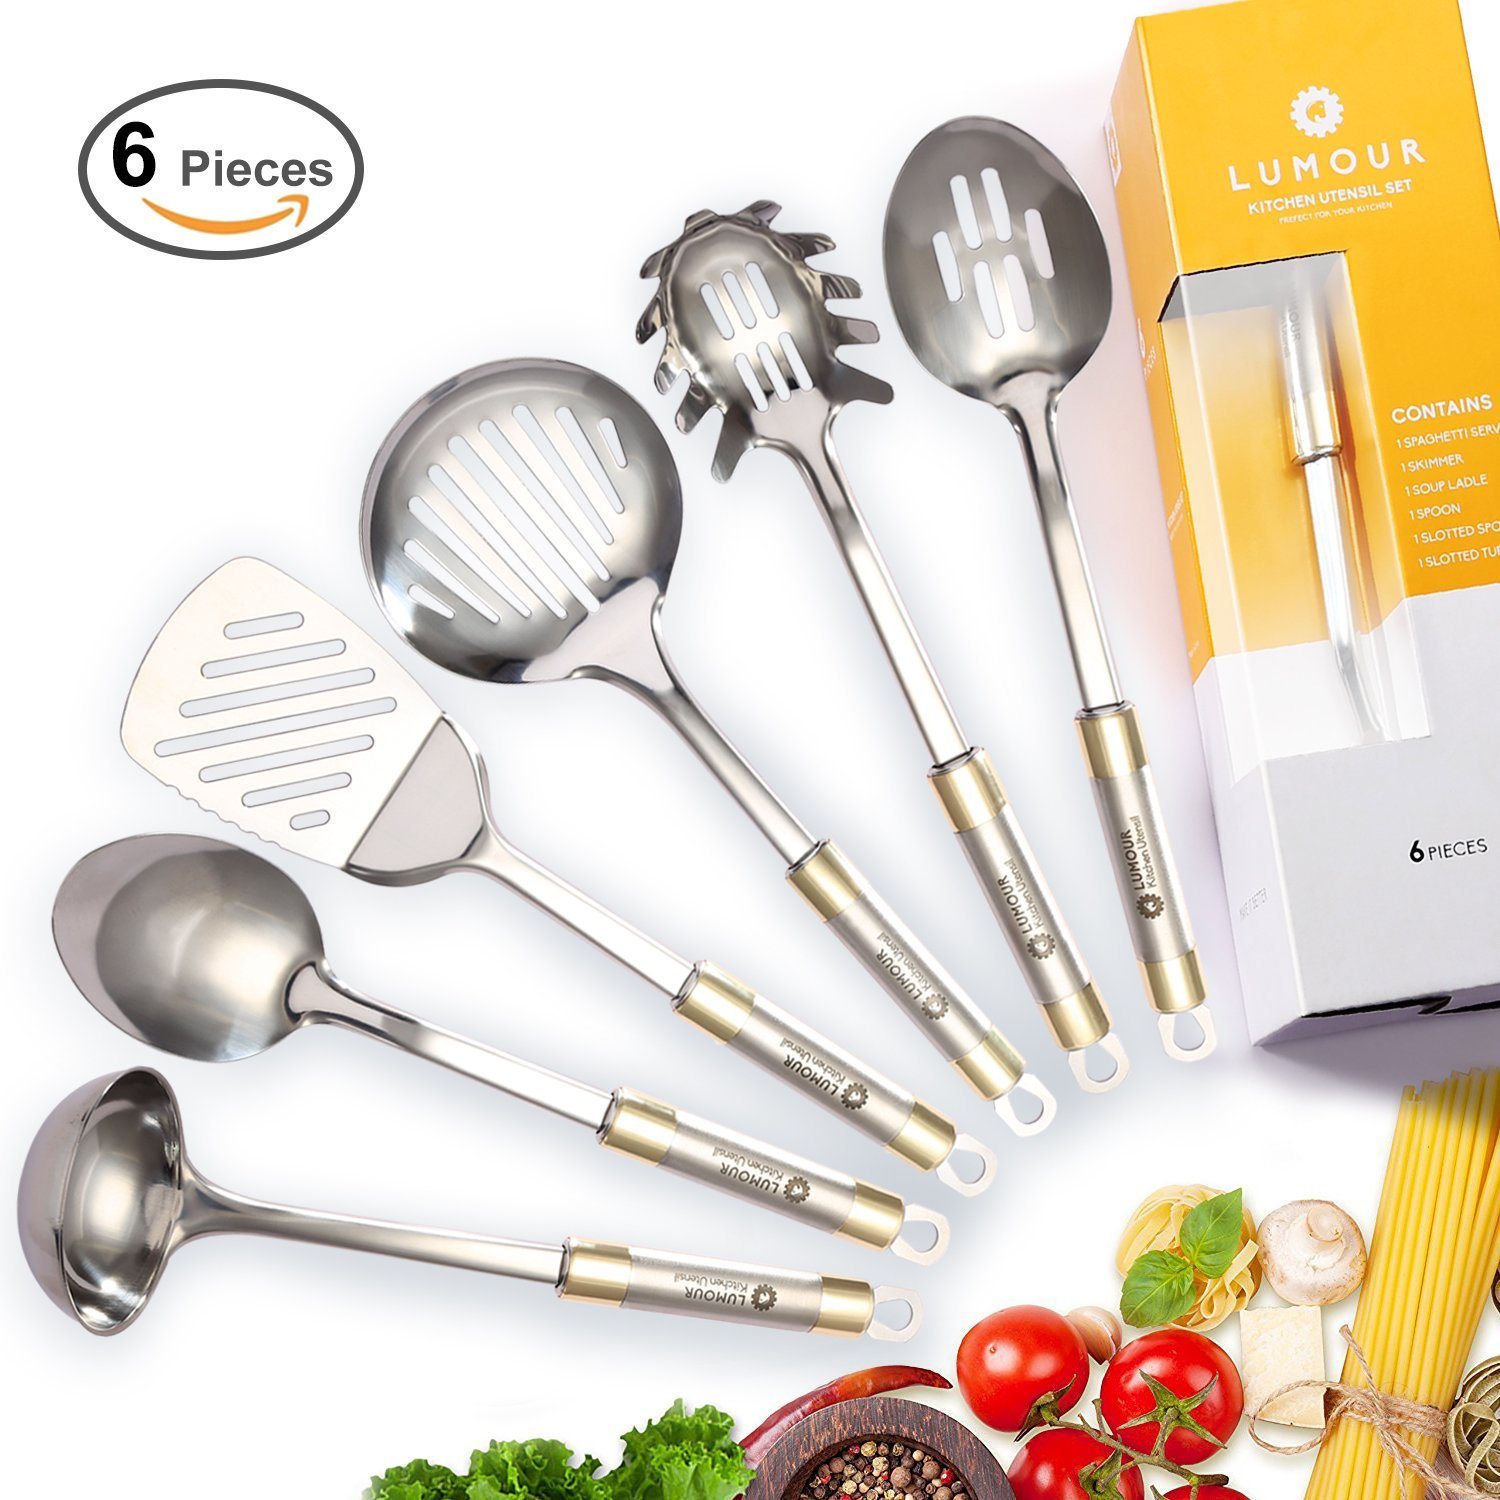 Top 10 Stainless Kitchen Cooking Utensil Set in 2019 Professional Pe